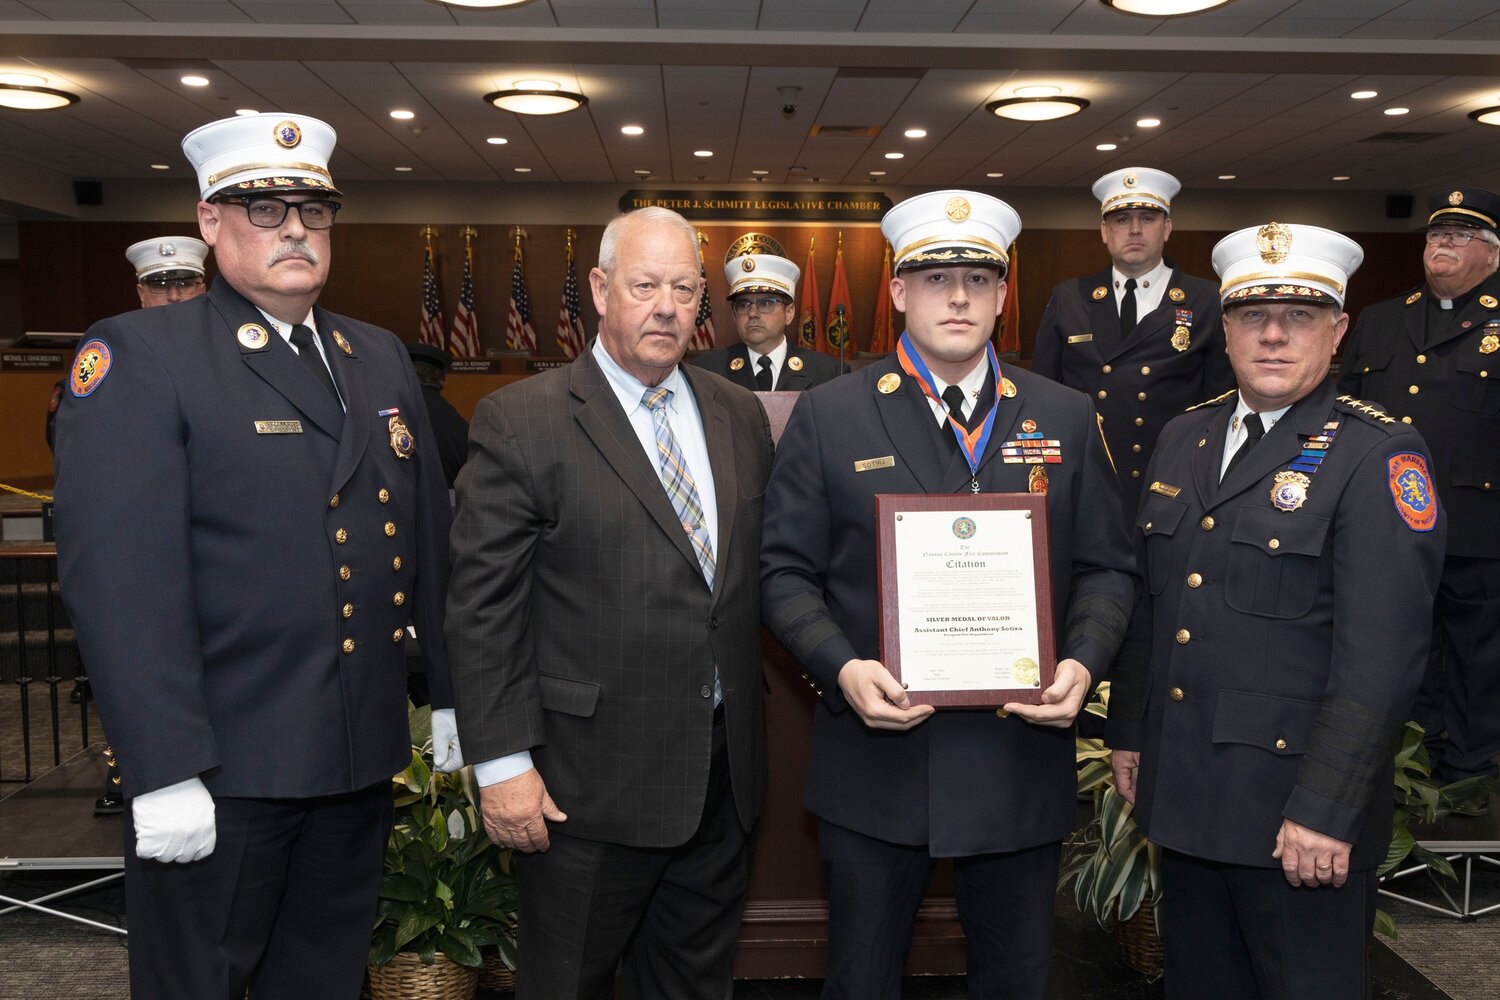 Freeport Mayor Robert Kennedy alongside Assistant Chief, Anthony Sotira who was proudly presented the Silver Medal of Valor by the Nassau County Fire Commission for his heroic actions during a fire rescue last November.